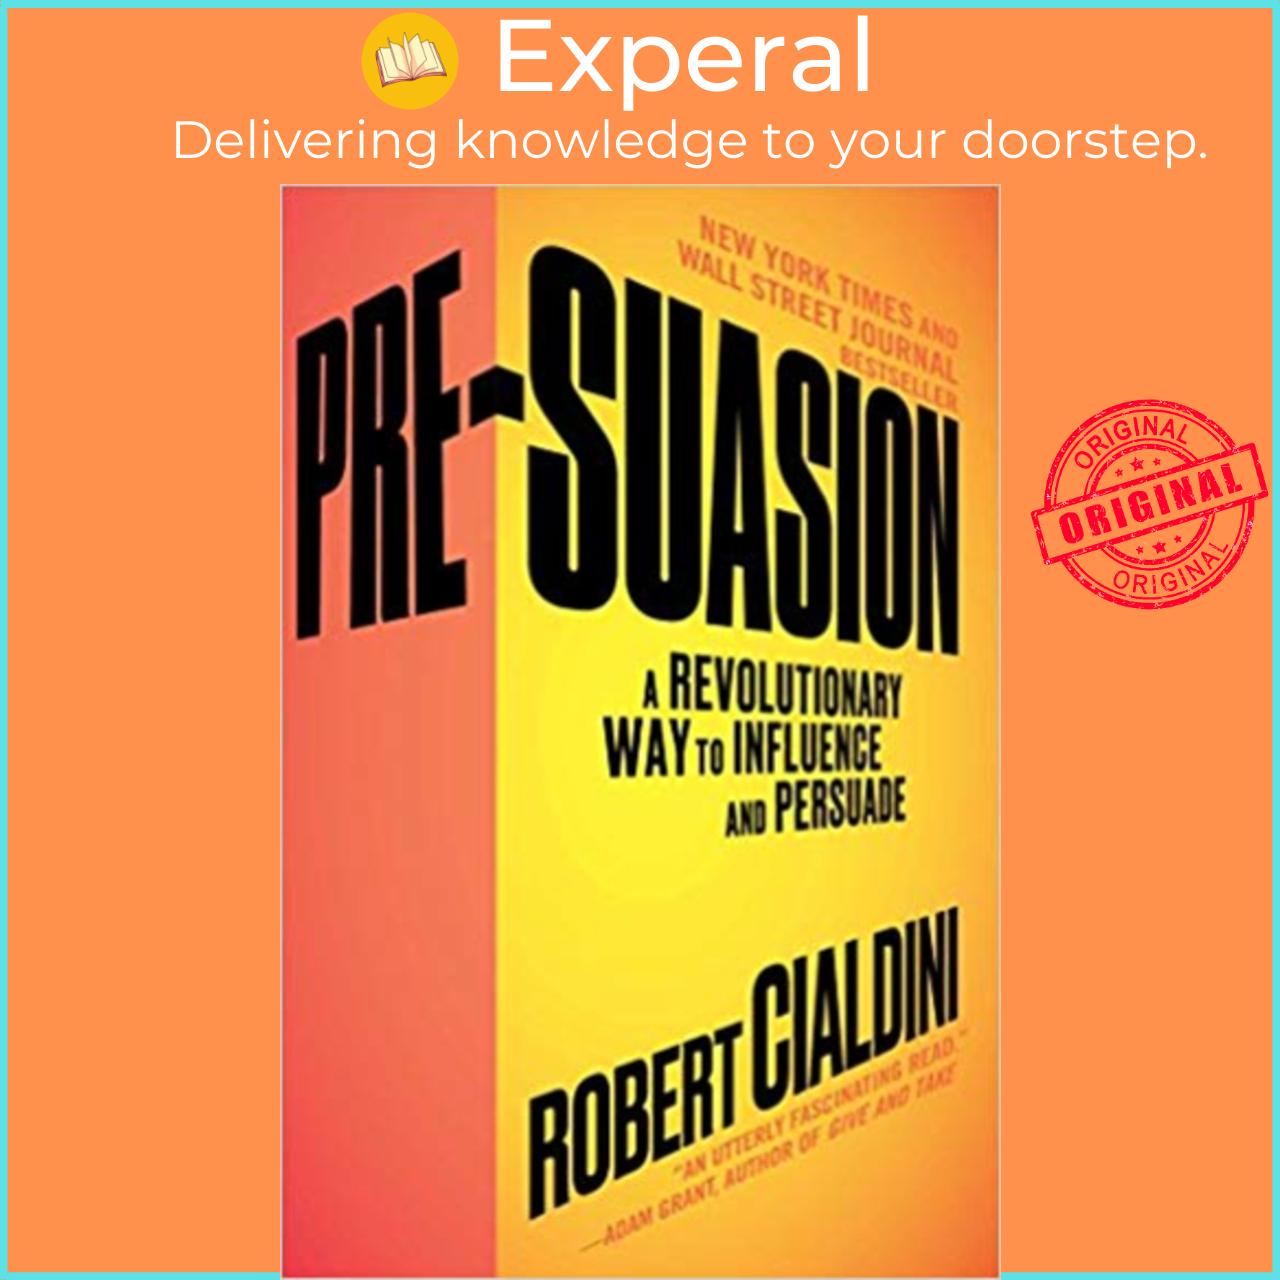 Sách - Pre-Suasion: A Revolutionary Way to Influence and Persuade by Robert Cialdini Ph.D. (US edition, paperback)